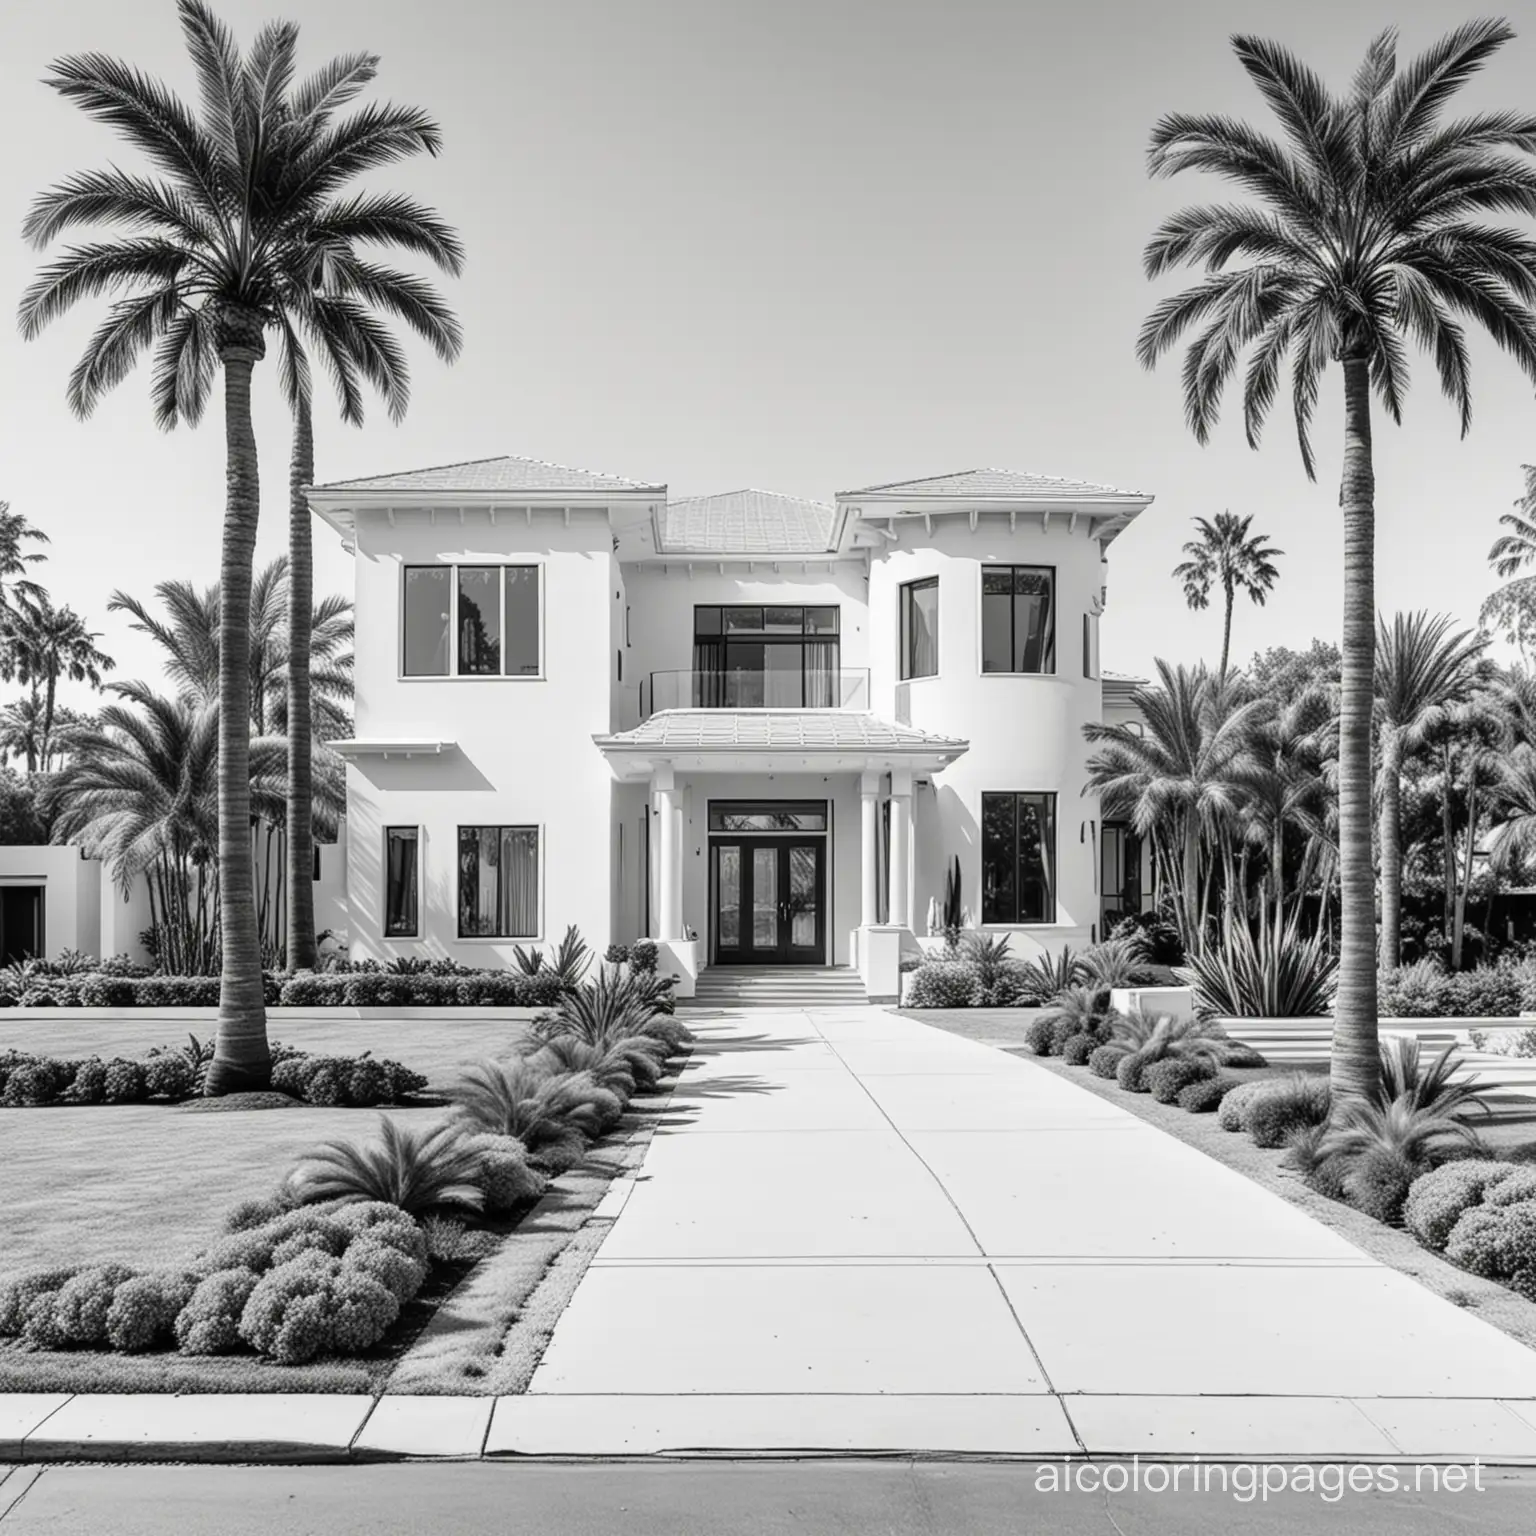 modern mansion with a driveway lined with palm strees, Coloring Page, black and white, line art, white background, Simplicity, Ample White Space. The background of the coloring page is plain white to make it easy for young children to color within the lines. The outlines of all the subjects are easy to distinguish, making it simple for kids to color without too much difficulty